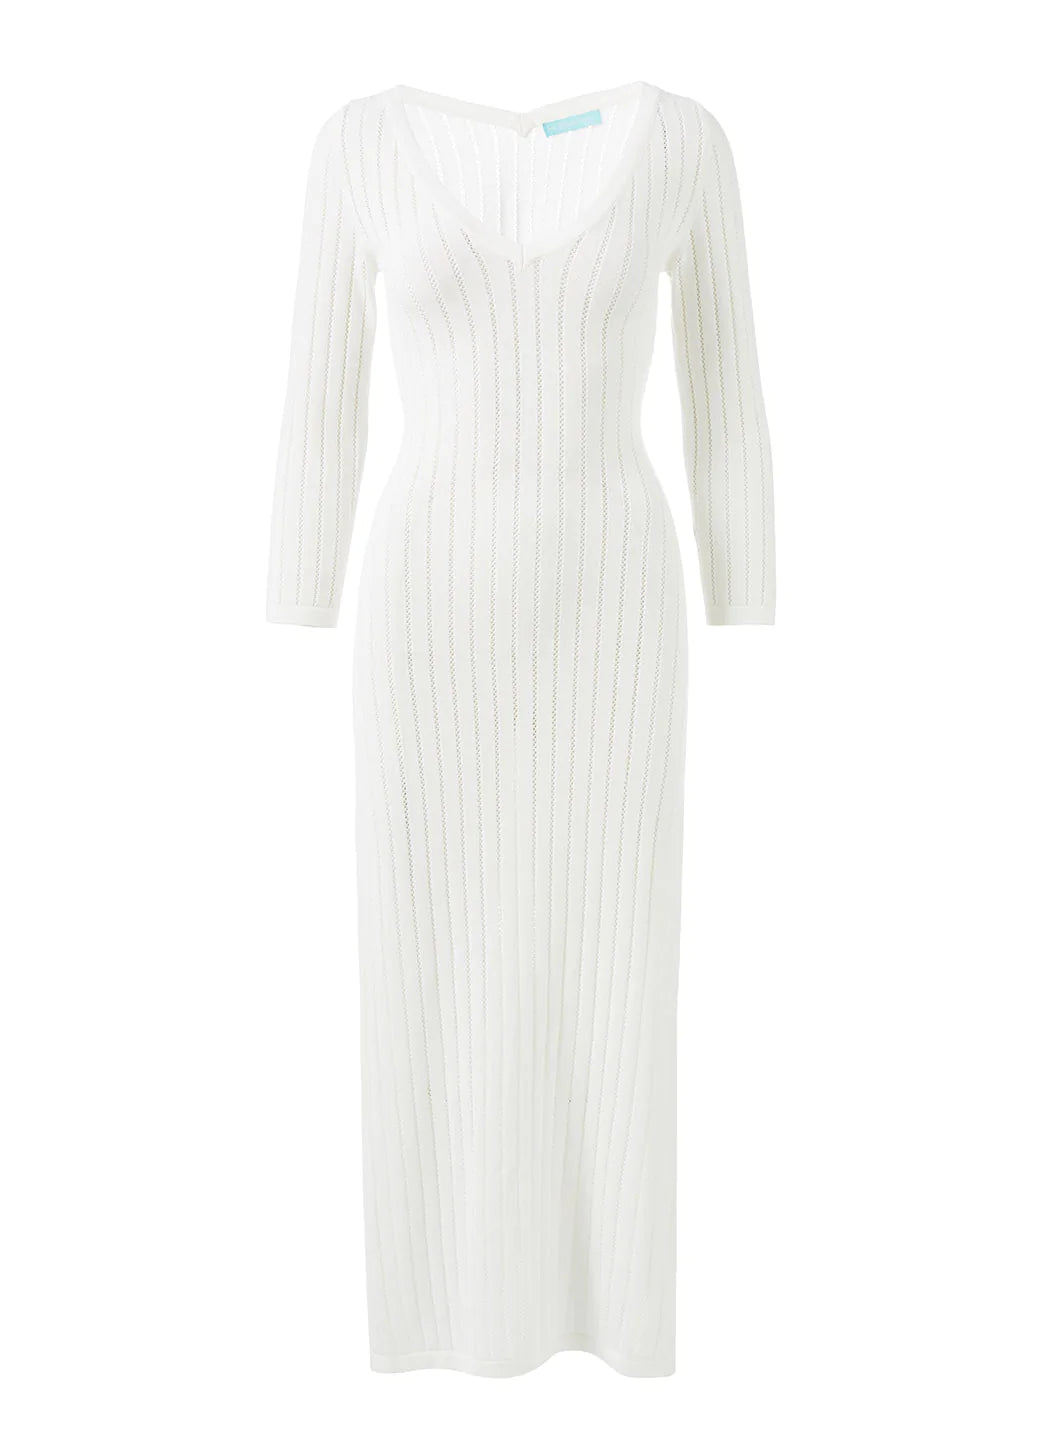 Melissa Odabash Jade White Scoop Neck Long Sleeve Fitted Maxi Knit